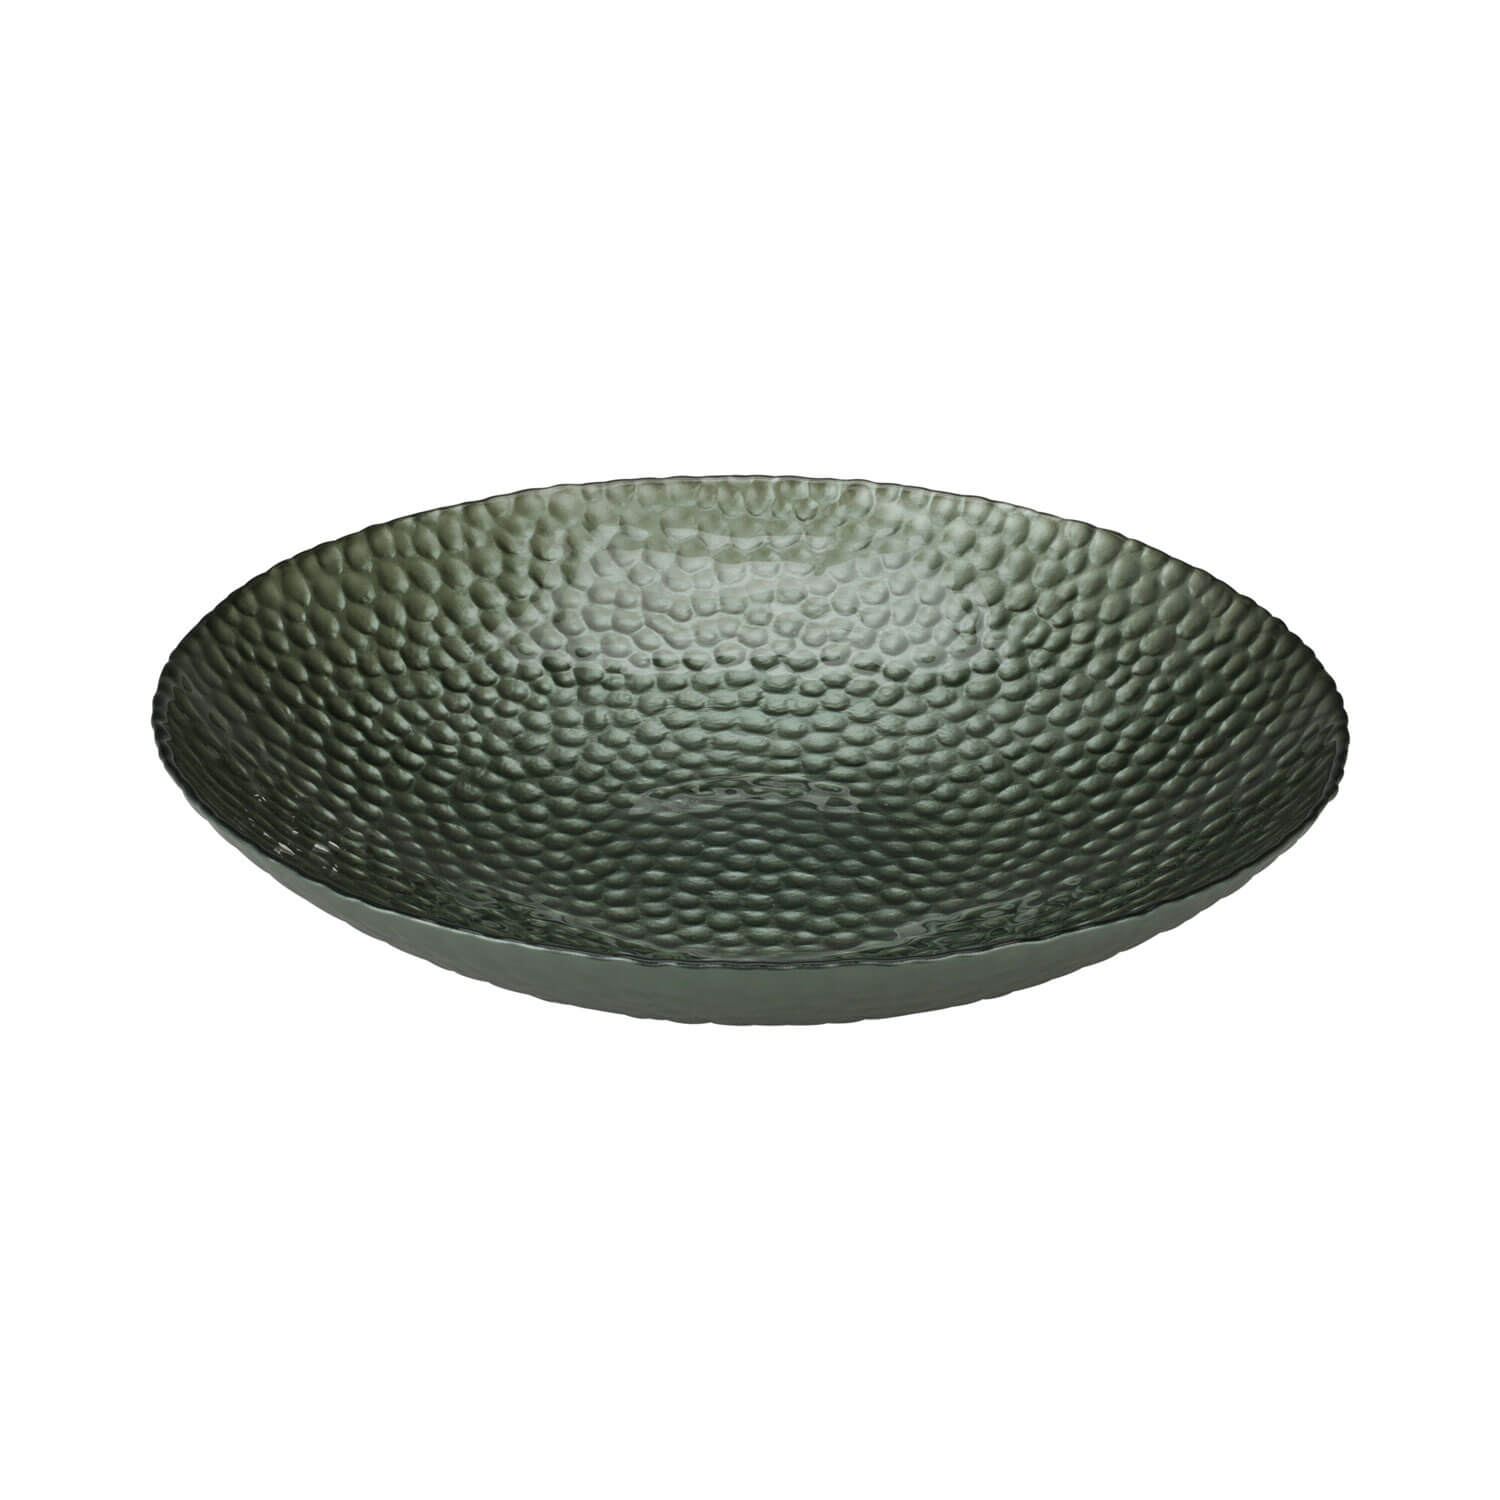 The Home Kitchen Glass Bowl - Green 1 Shaws Department Stores